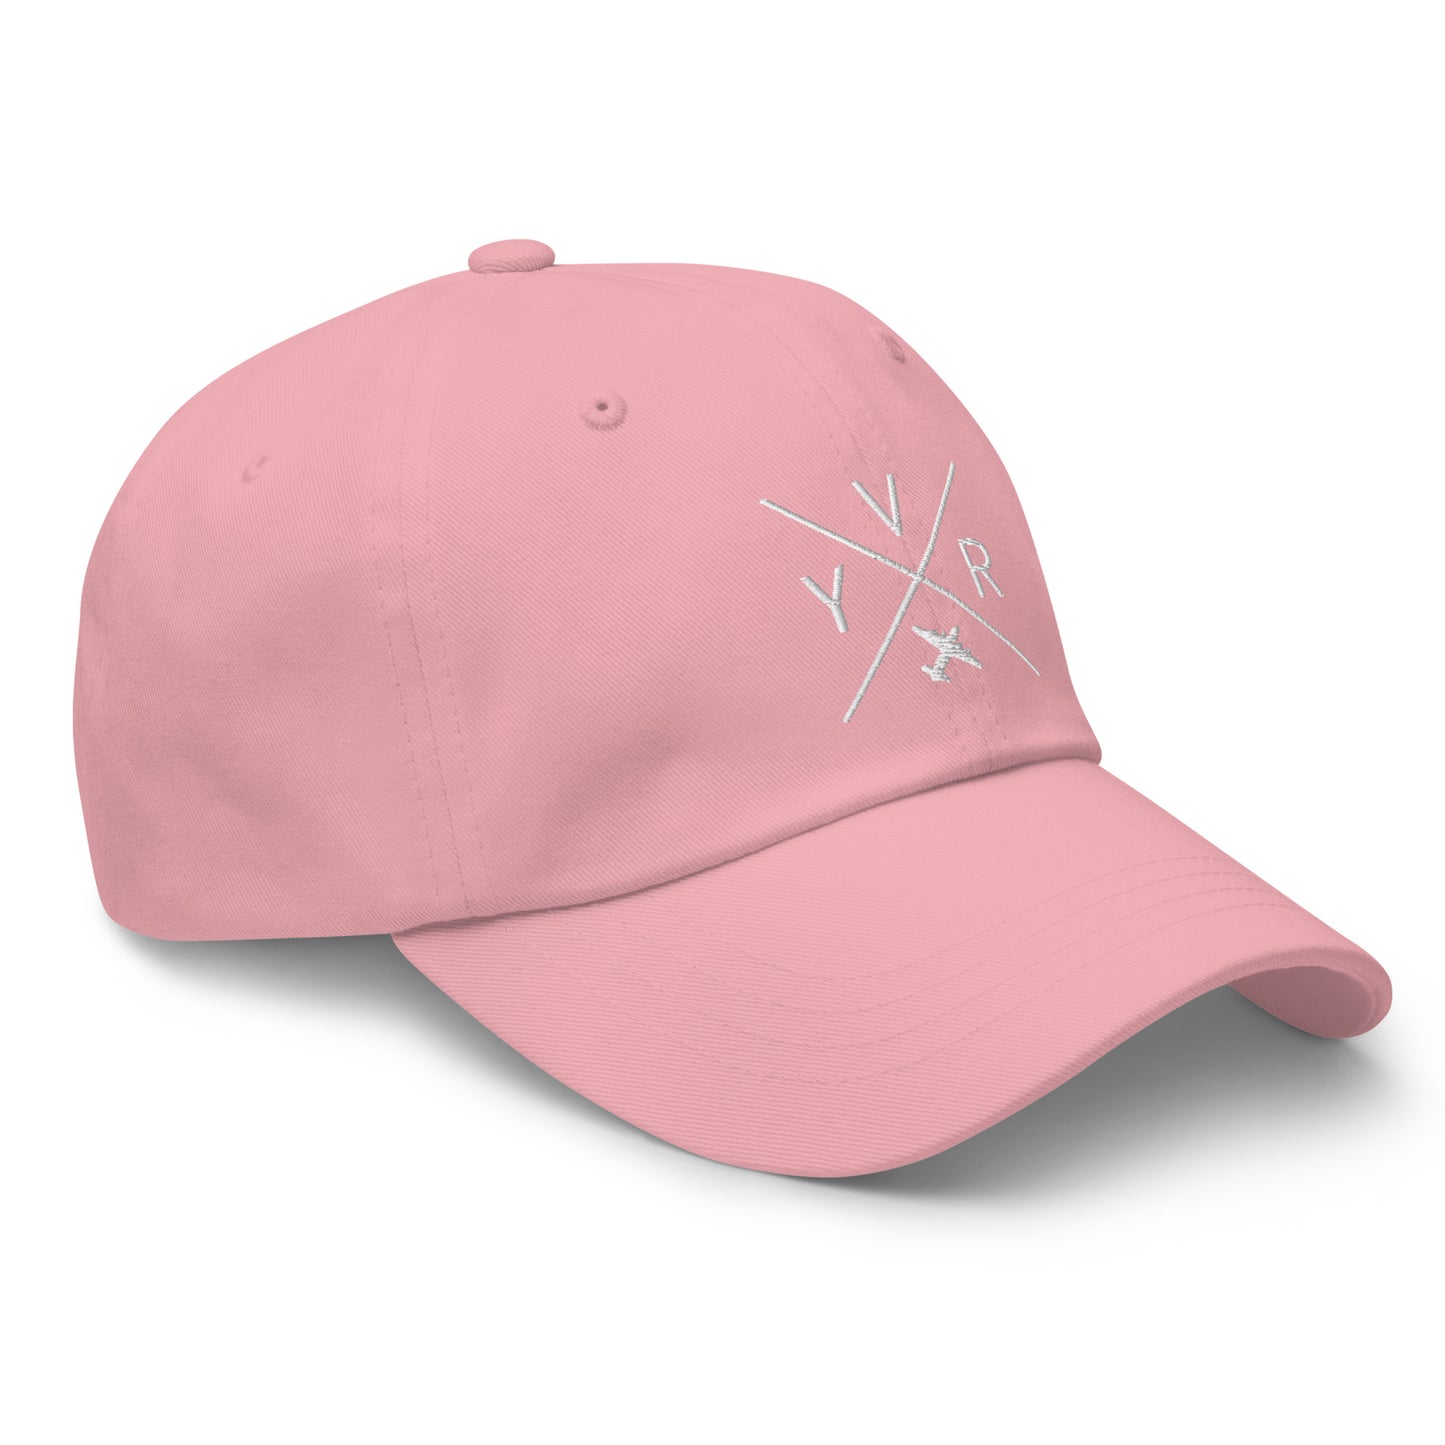 Crossed-X Dad Hat - White • YVR Vancouver • YHM Designs - Image 19